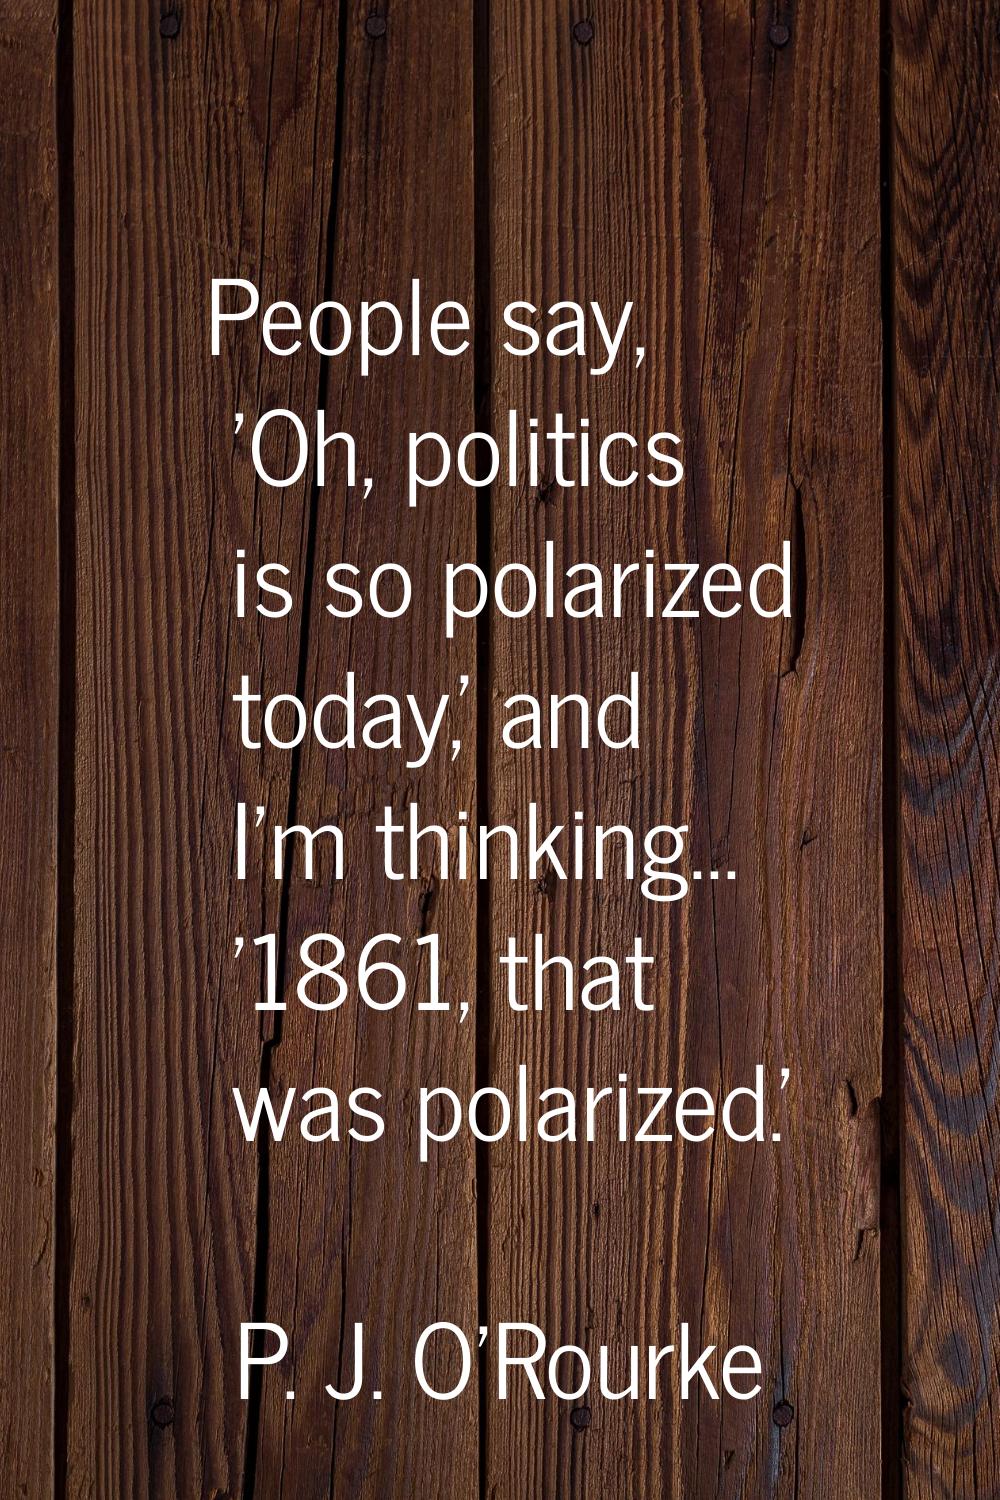 People say, 'Oh, politics is so polarized today,' and I'm thinking... '1861, that was polarized.'